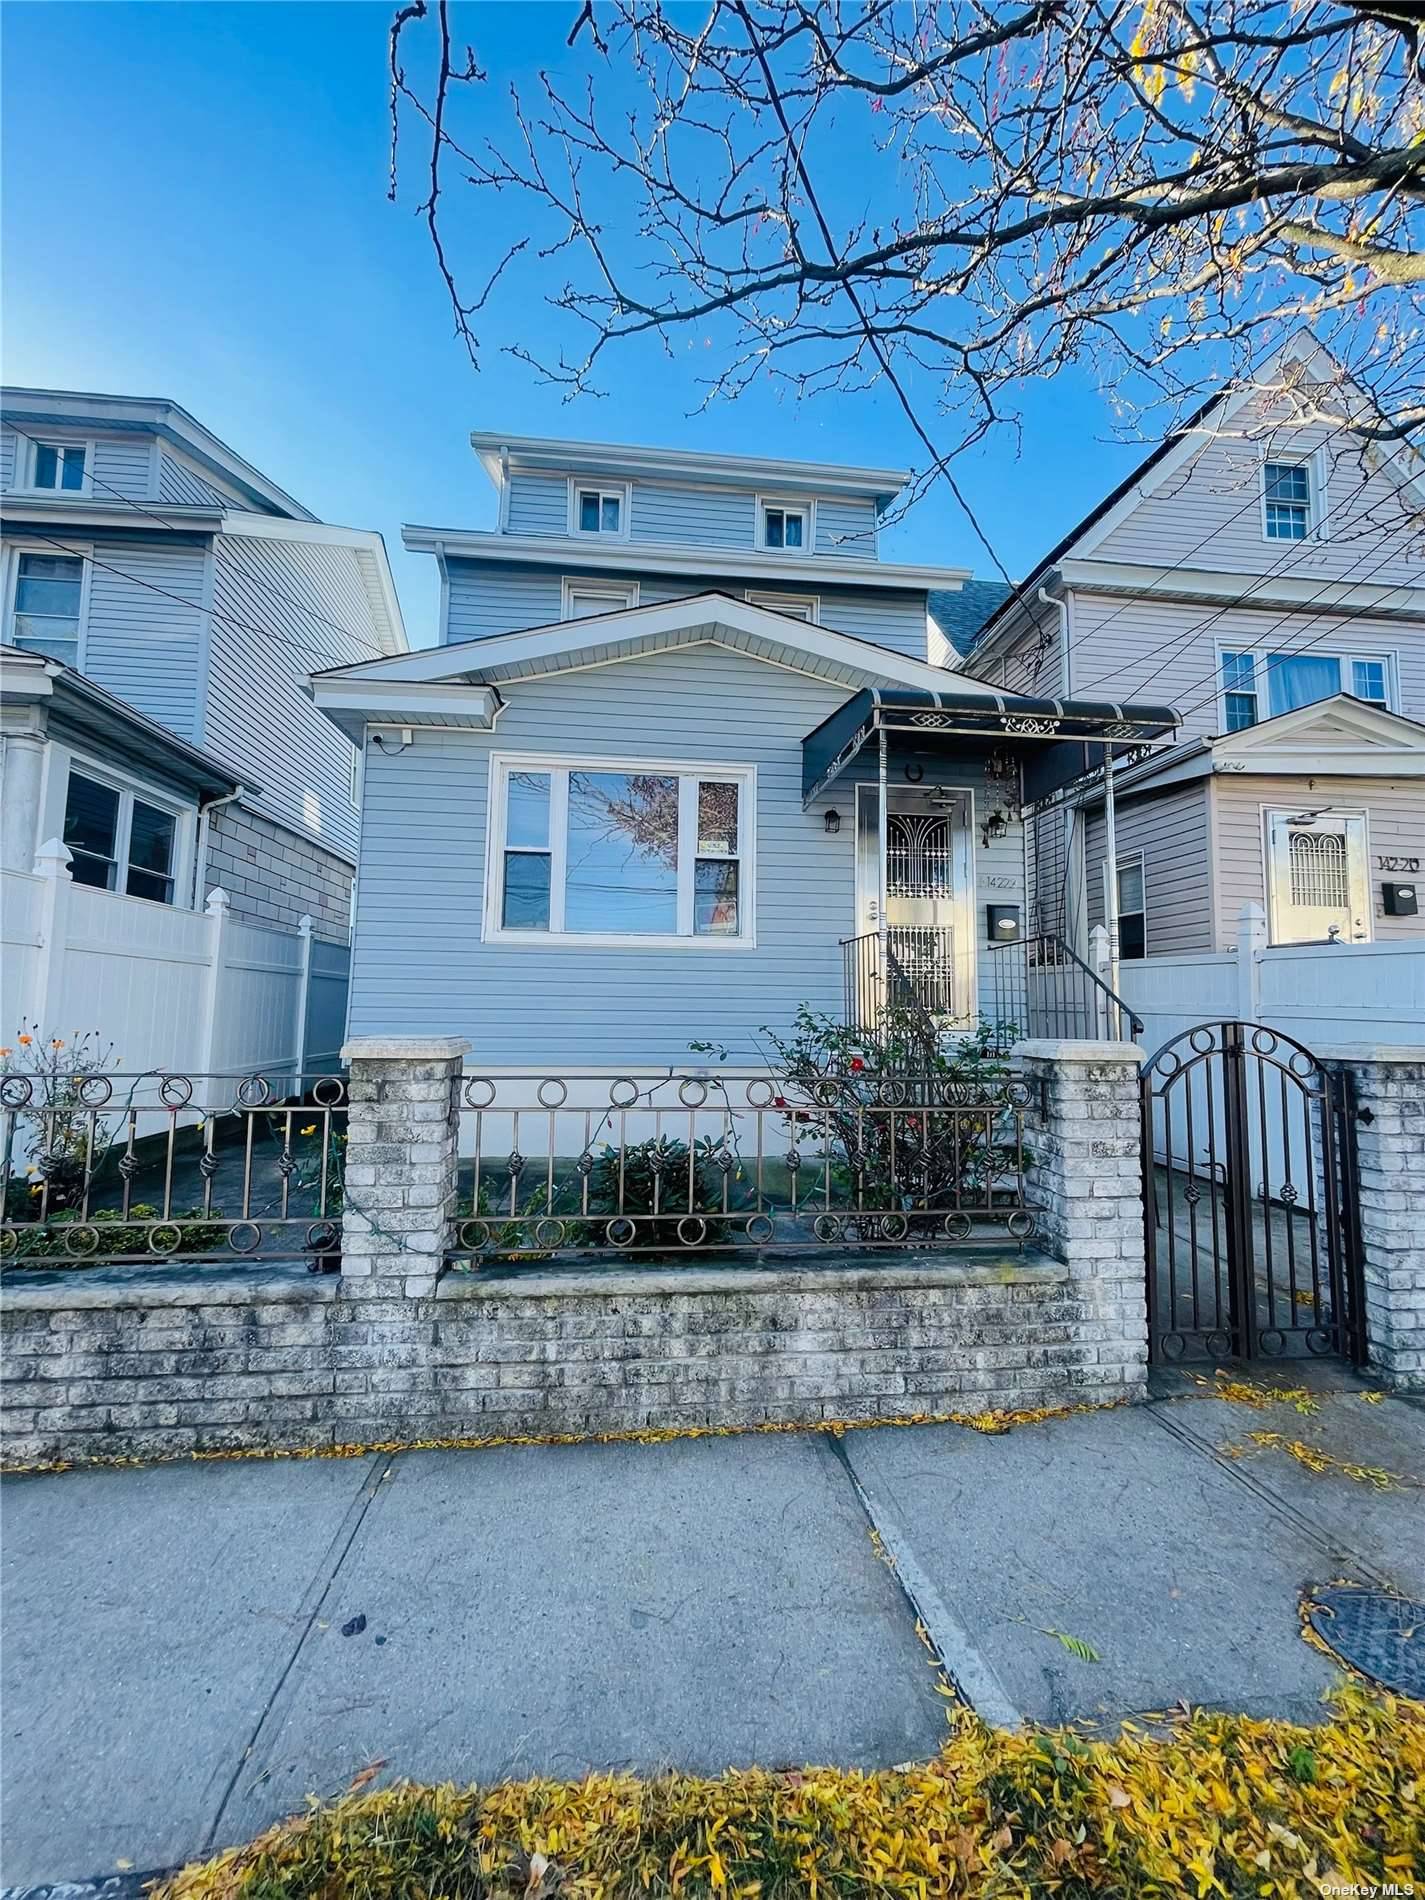 Spacious whole house for rent in South Ozone Park.